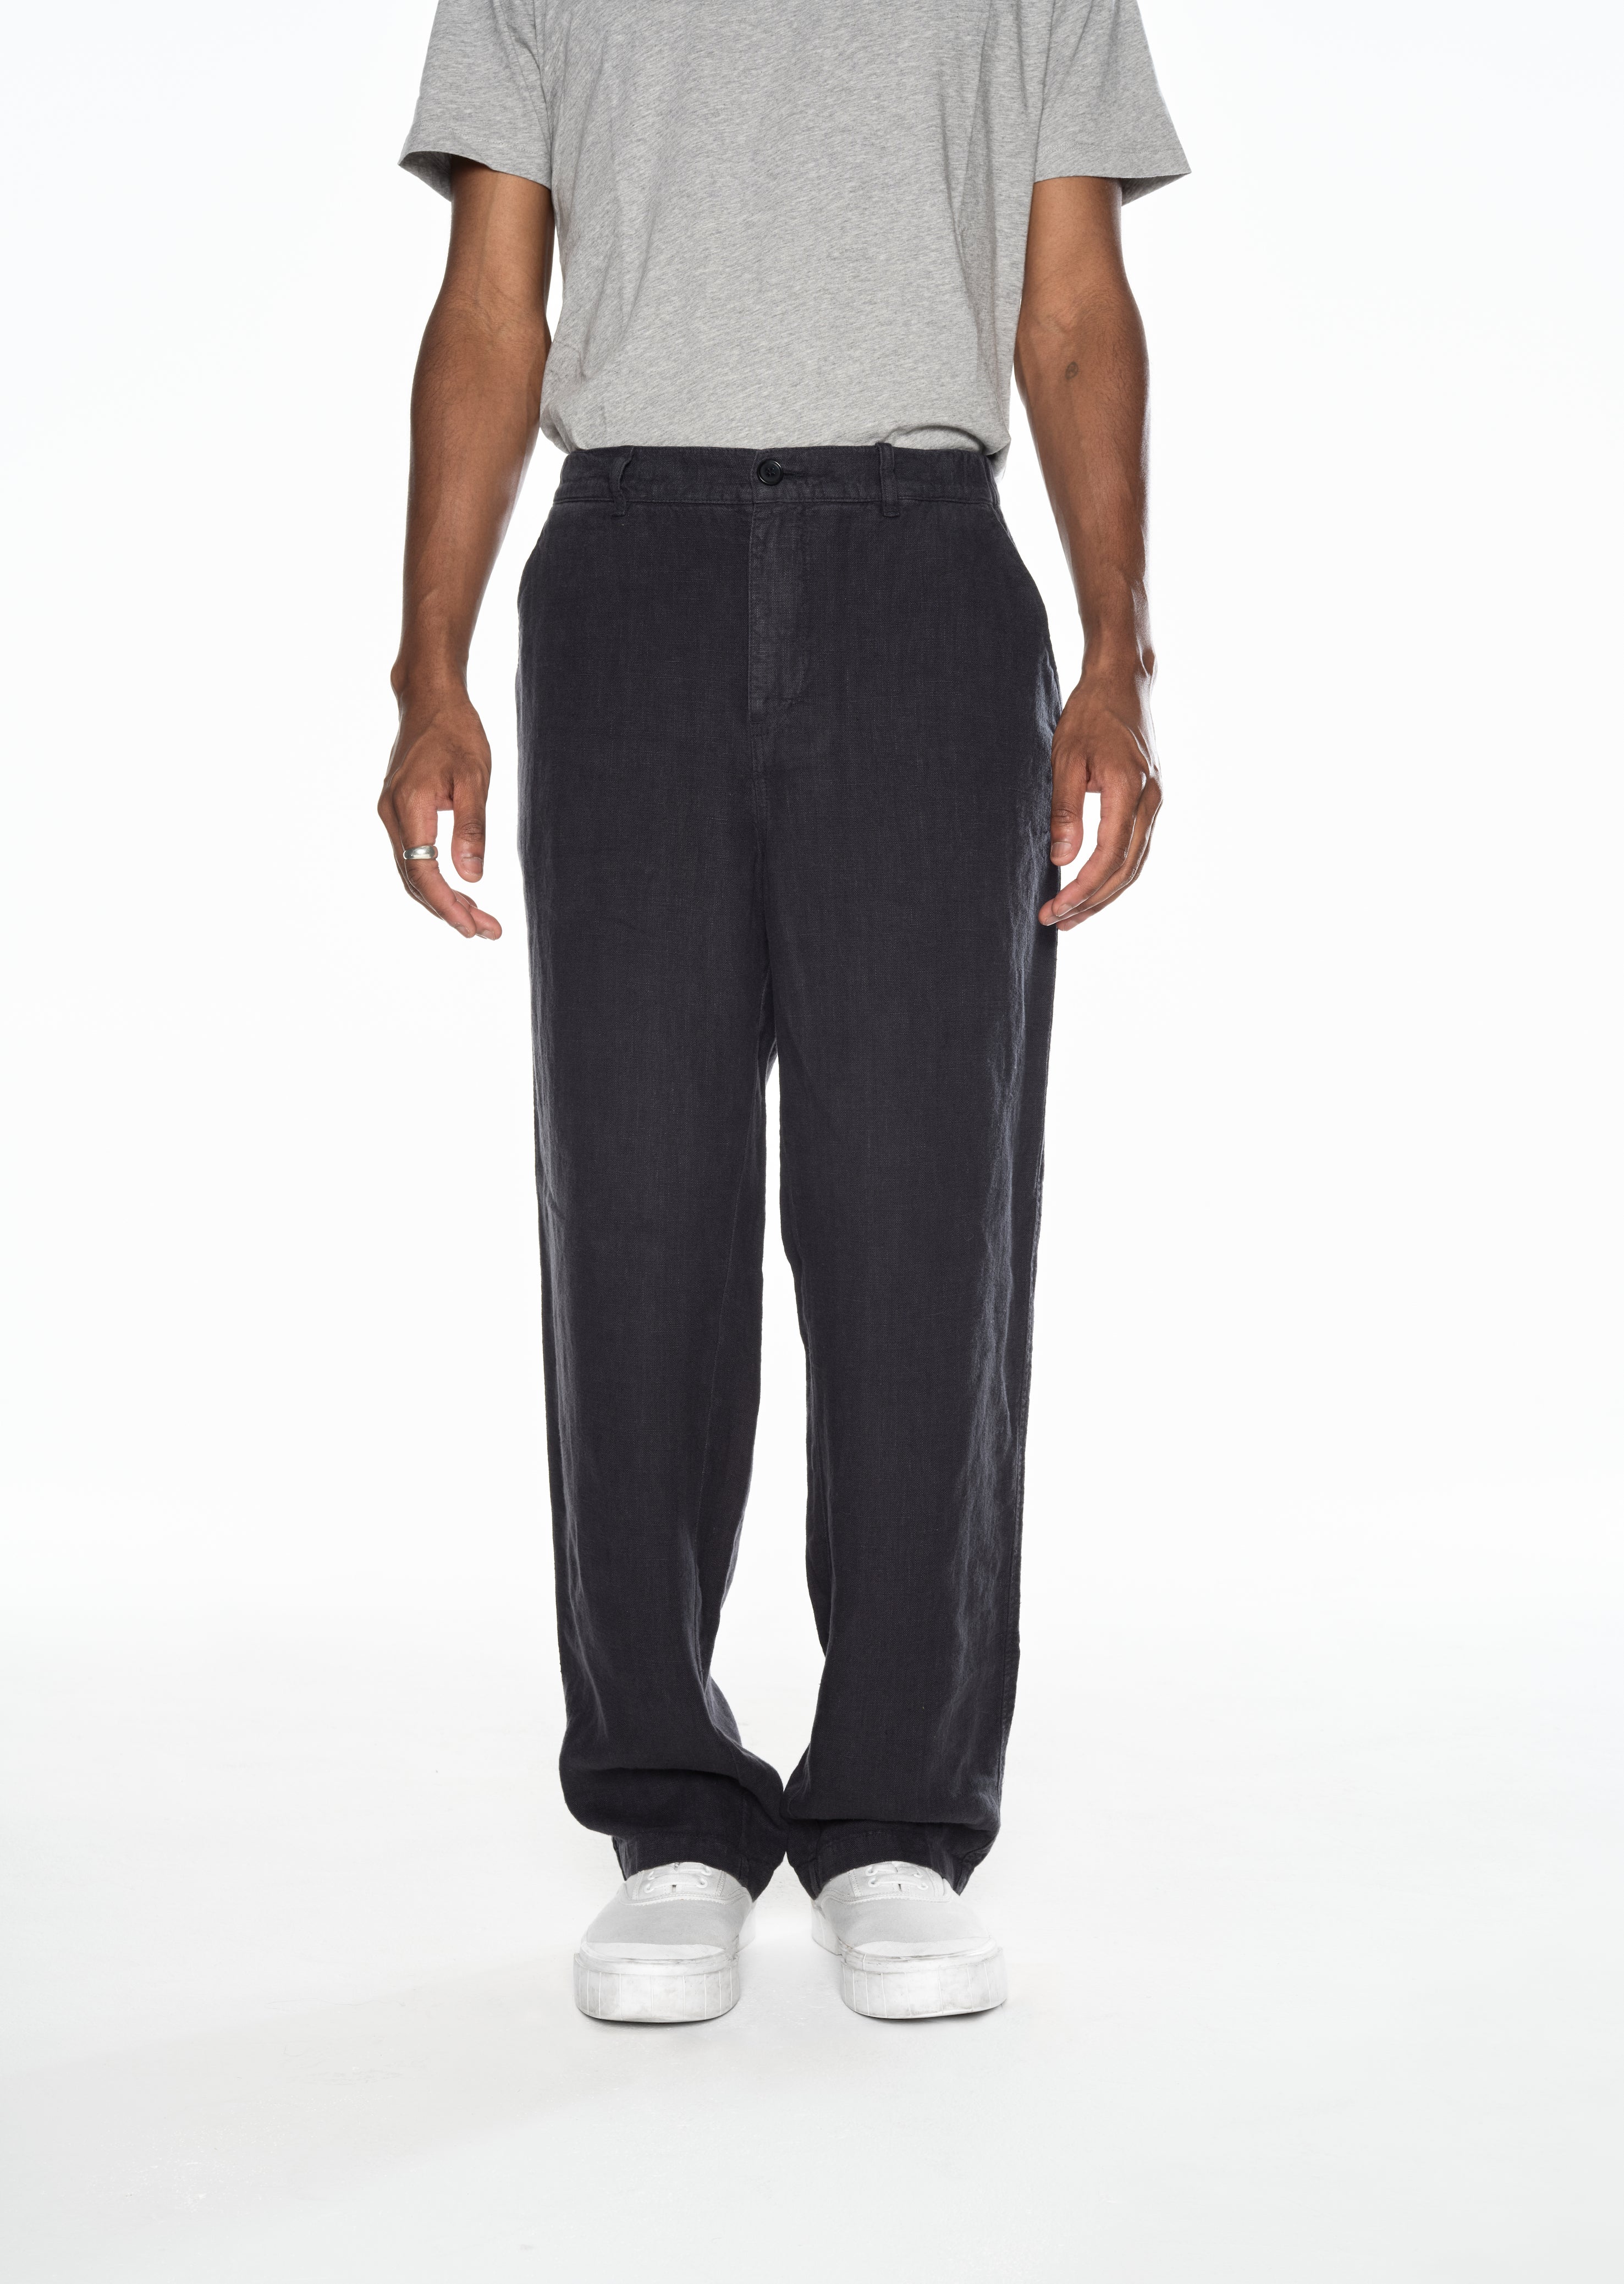 Men's Linen Pants, Linen trousers, joggers and shorts︱ - In the Middle Tulum